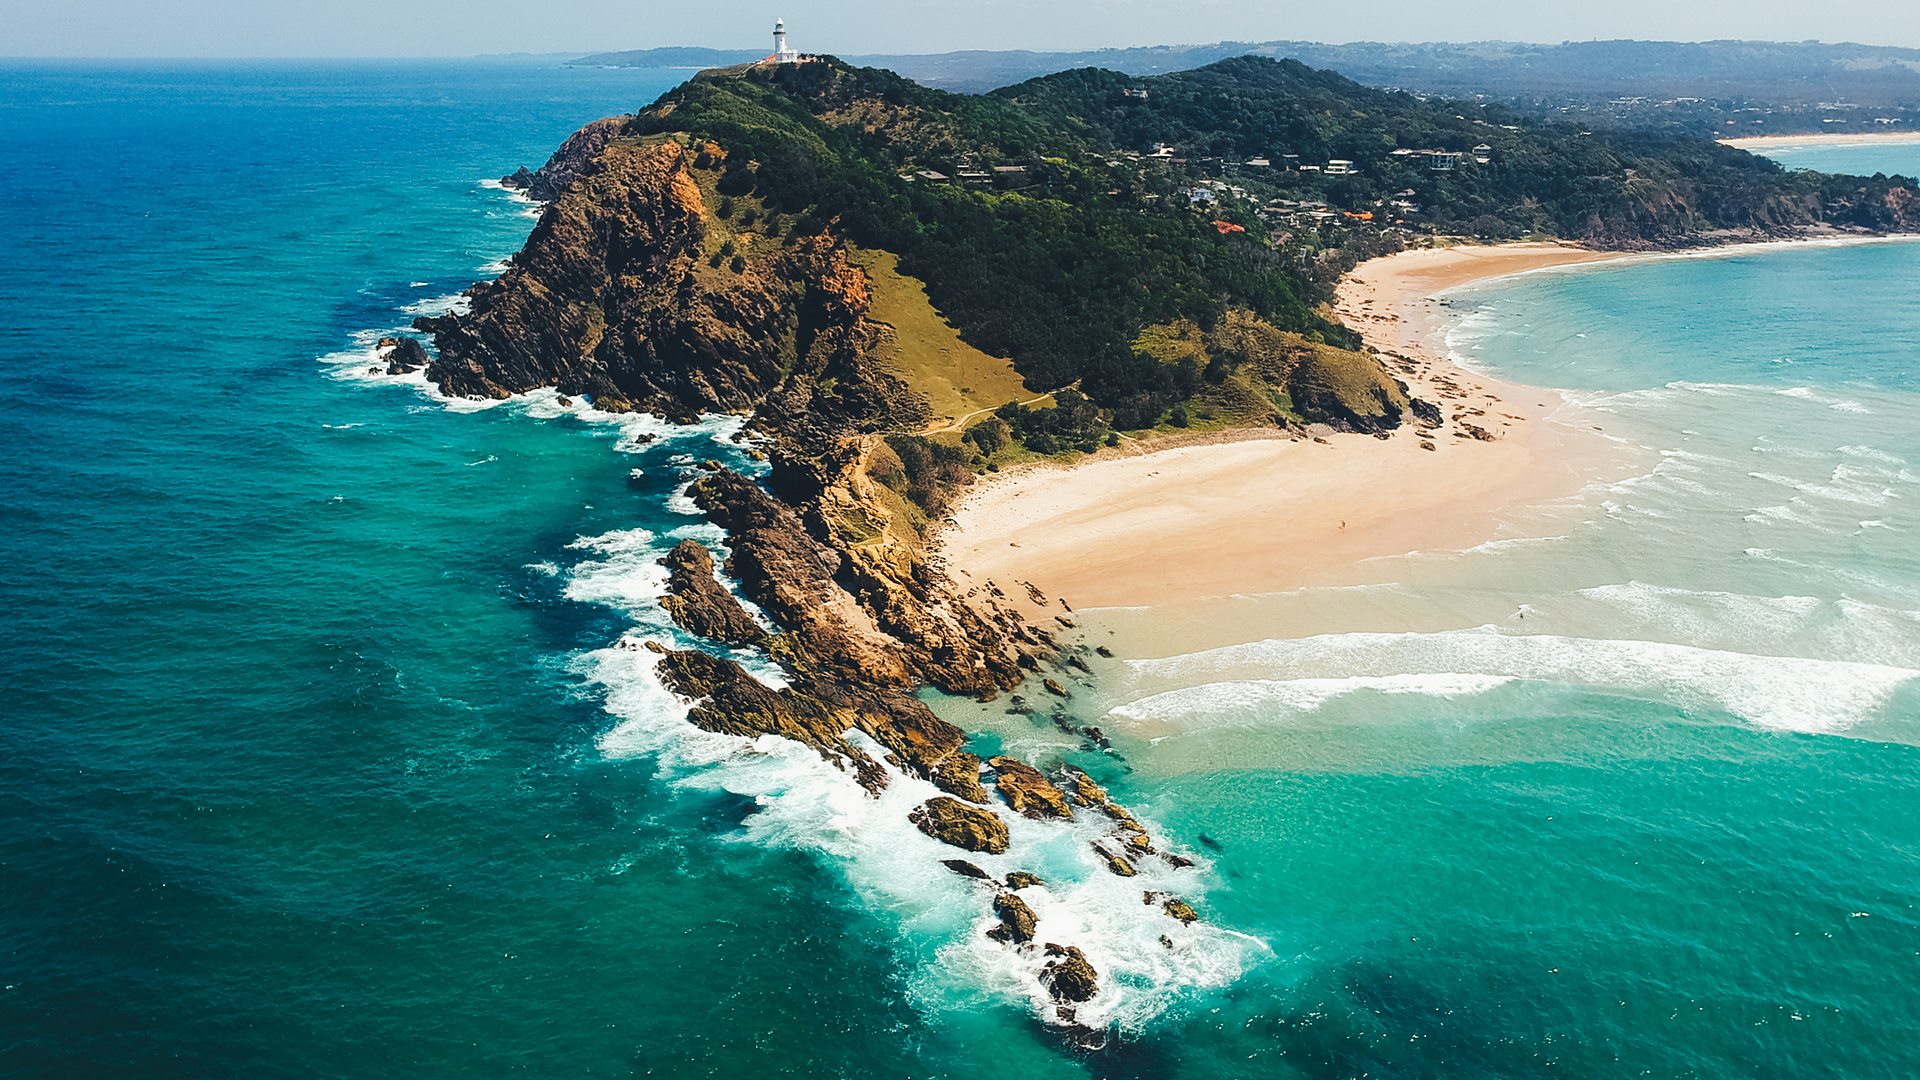 Byron Bay: Why a famous Australian beach is disappearing